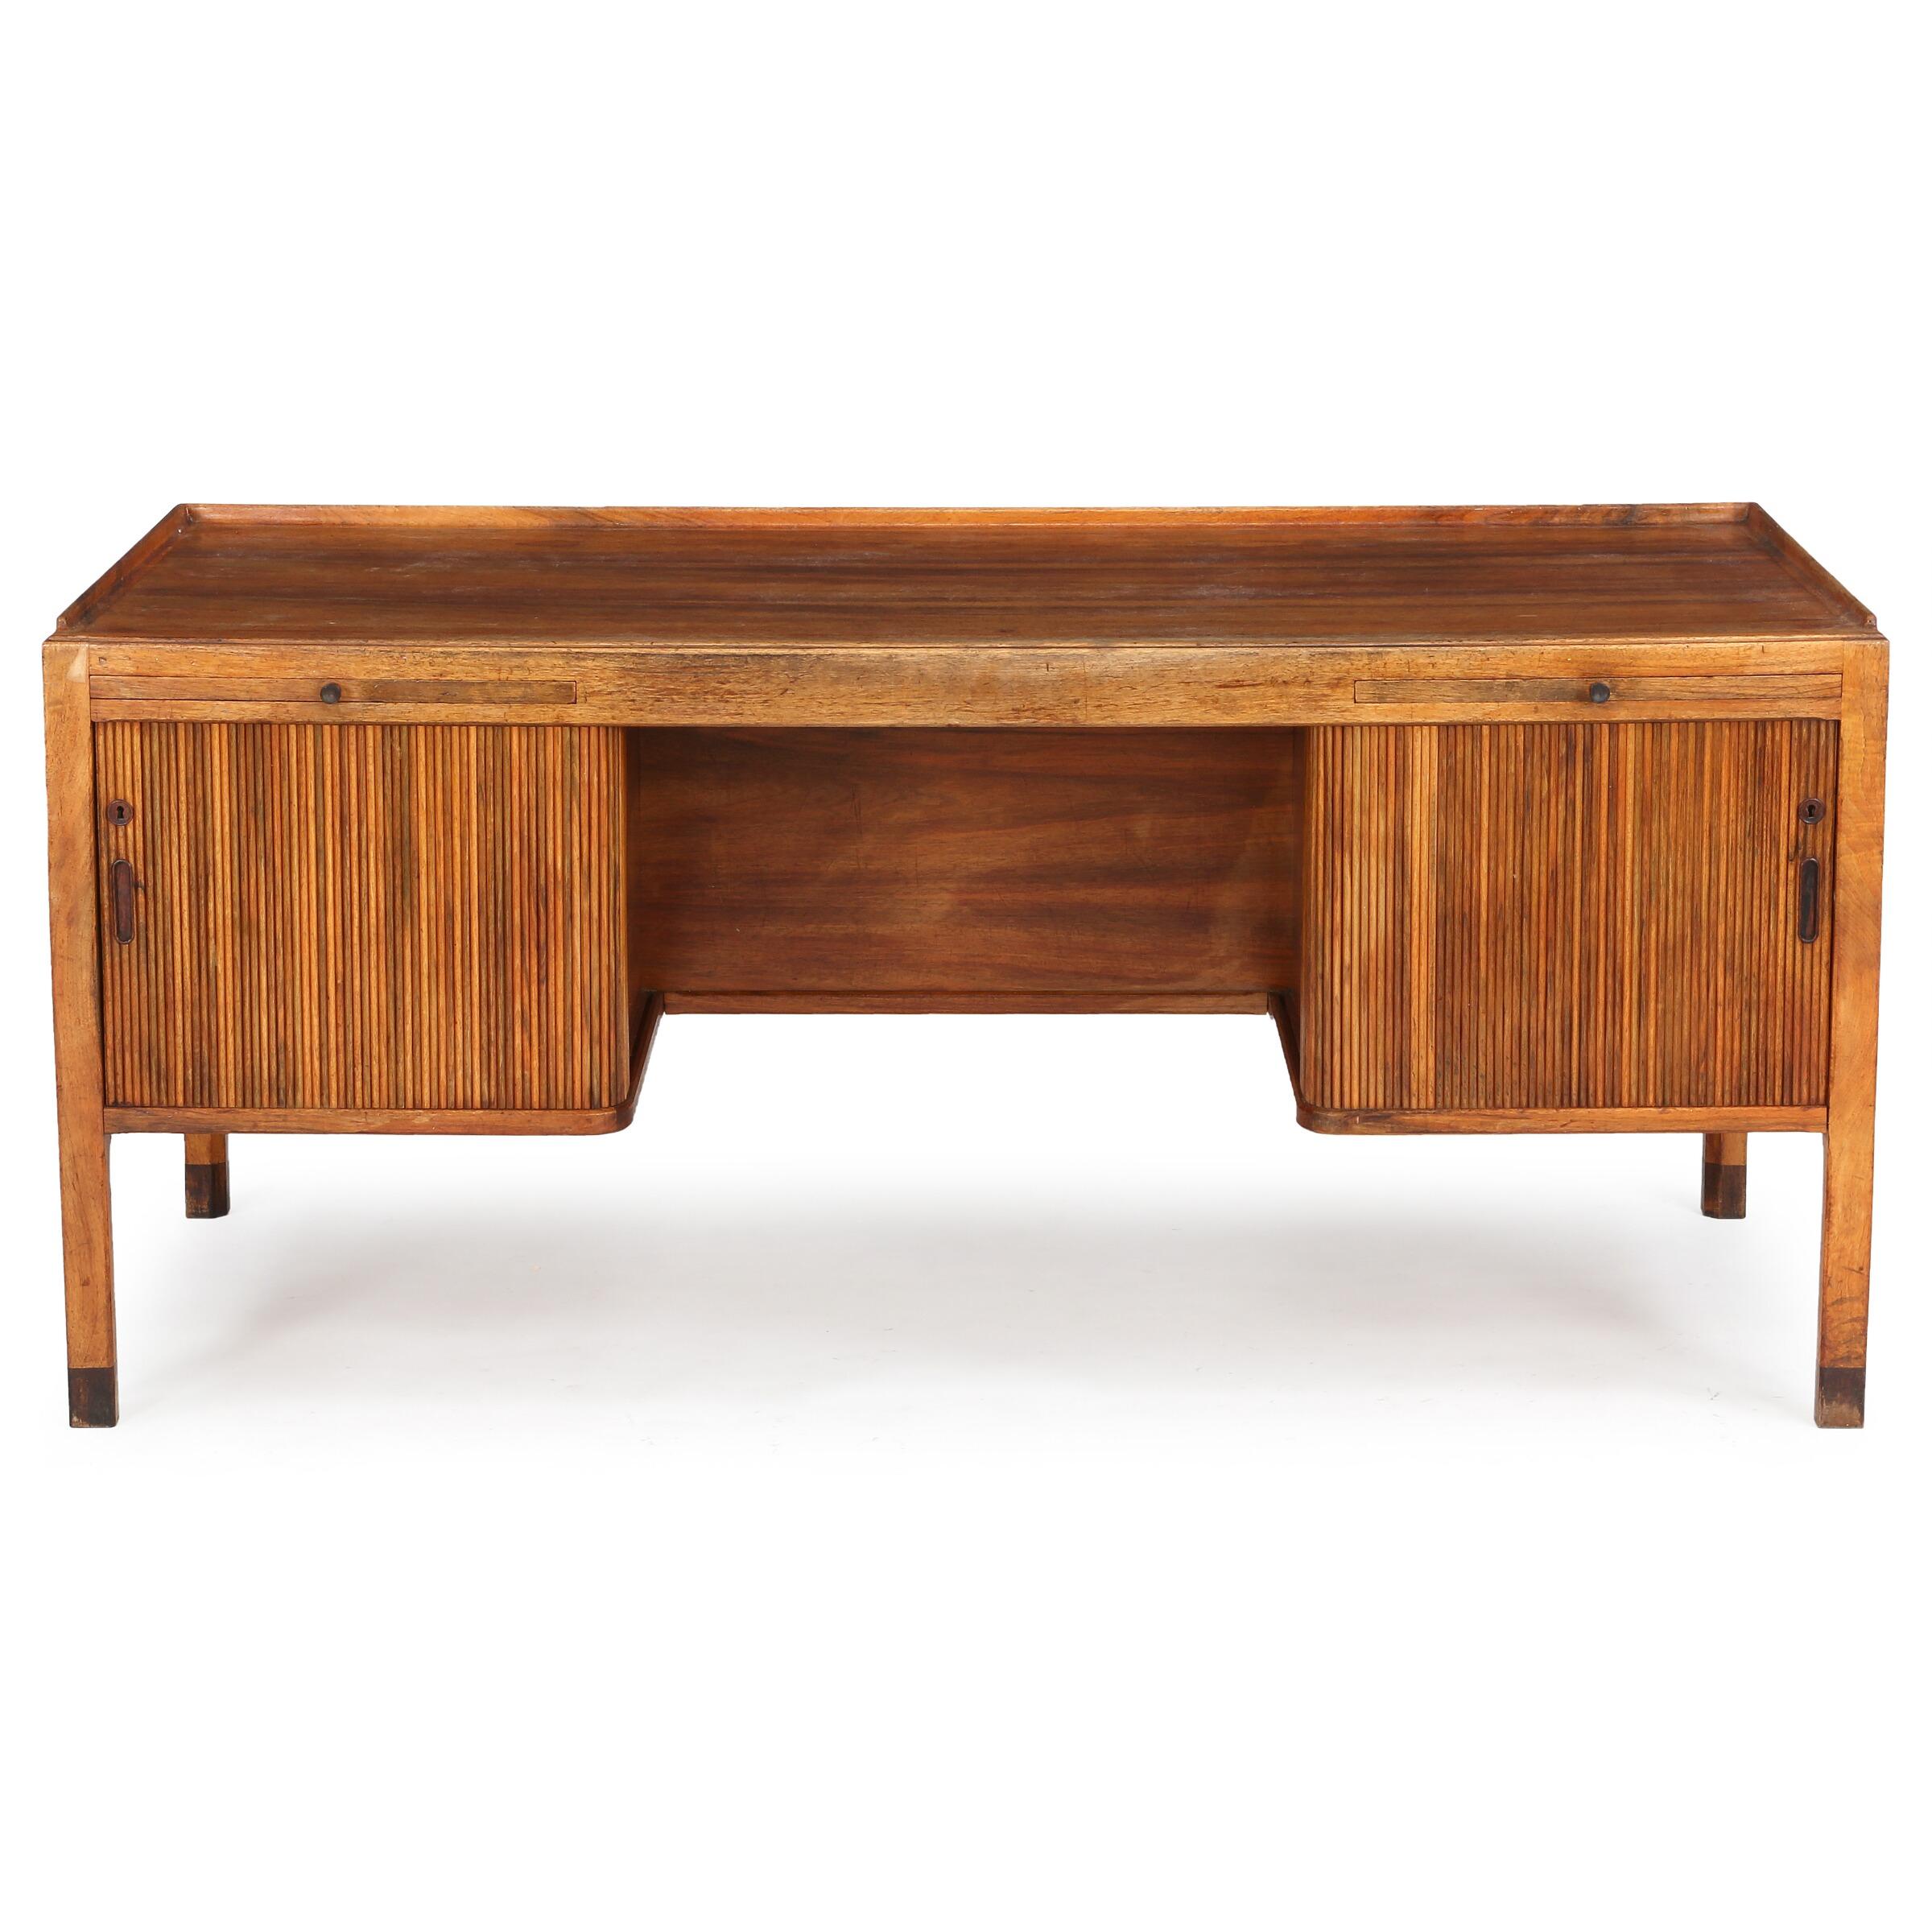 Group of furniture made to order in 1947 by Ove Lander, Bredgade, Palae, Copenhagen Denmark and a third piece made in 1957 to match the originals pieces. For the avoidance of doubt, this listing is for one desk and sideboards with two shelving